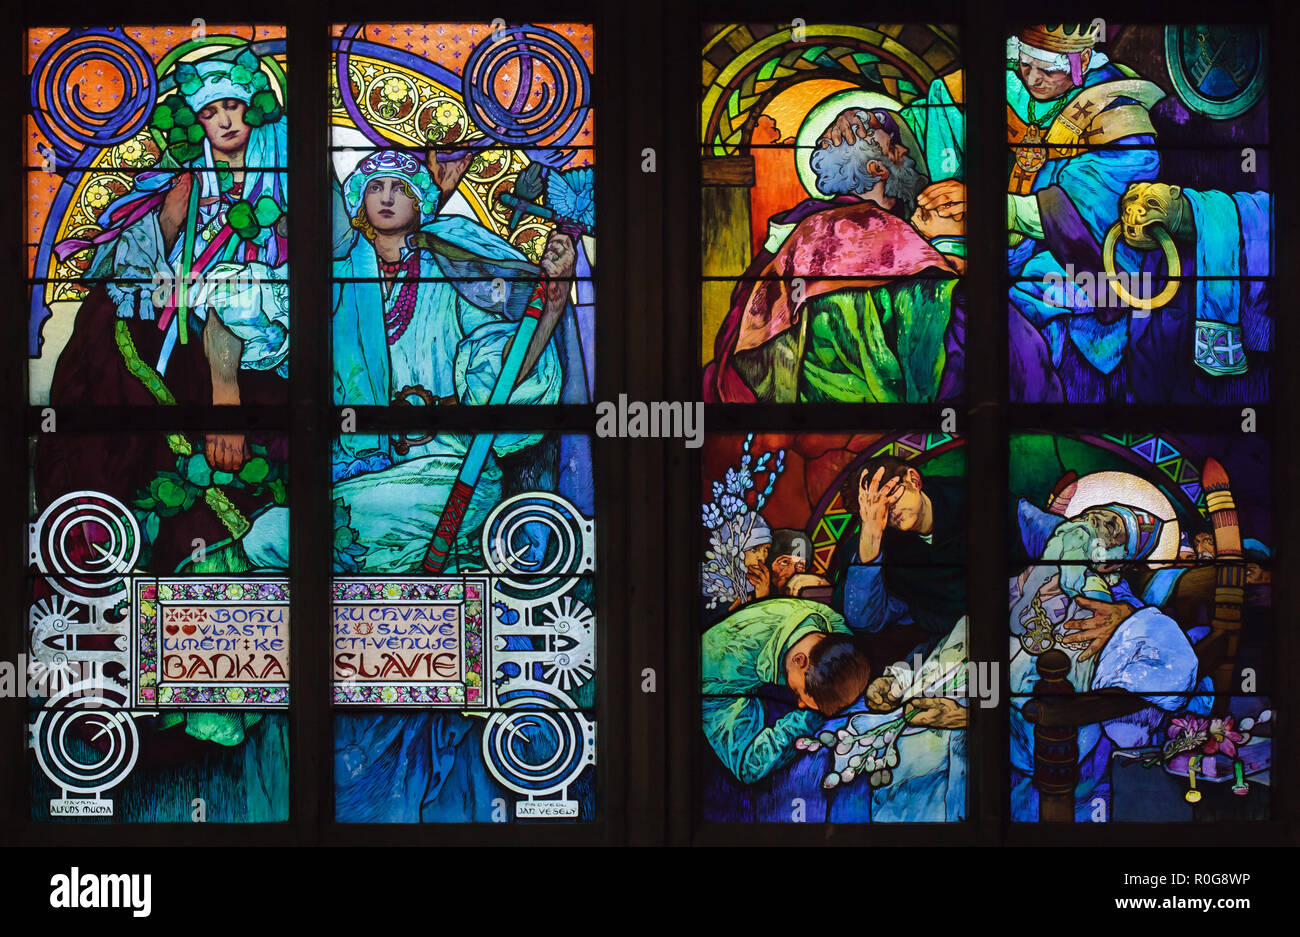 Detail of the stained-glass window designed by Czech Art Nouveau artist Alfons Mucha in Saint Vitus' Cathedral in the Prague Castle in Prague, Czech Republic. The scenes from the life of Saints Cyril and Methodius are depicted in the stained-glass window at the right from top to bottom: Pope John VIII authorizes Saint Methodius to translate the Bible into Slavonic language; the death of Saint Methodius in the Great Moravian Empire. Stock Photo